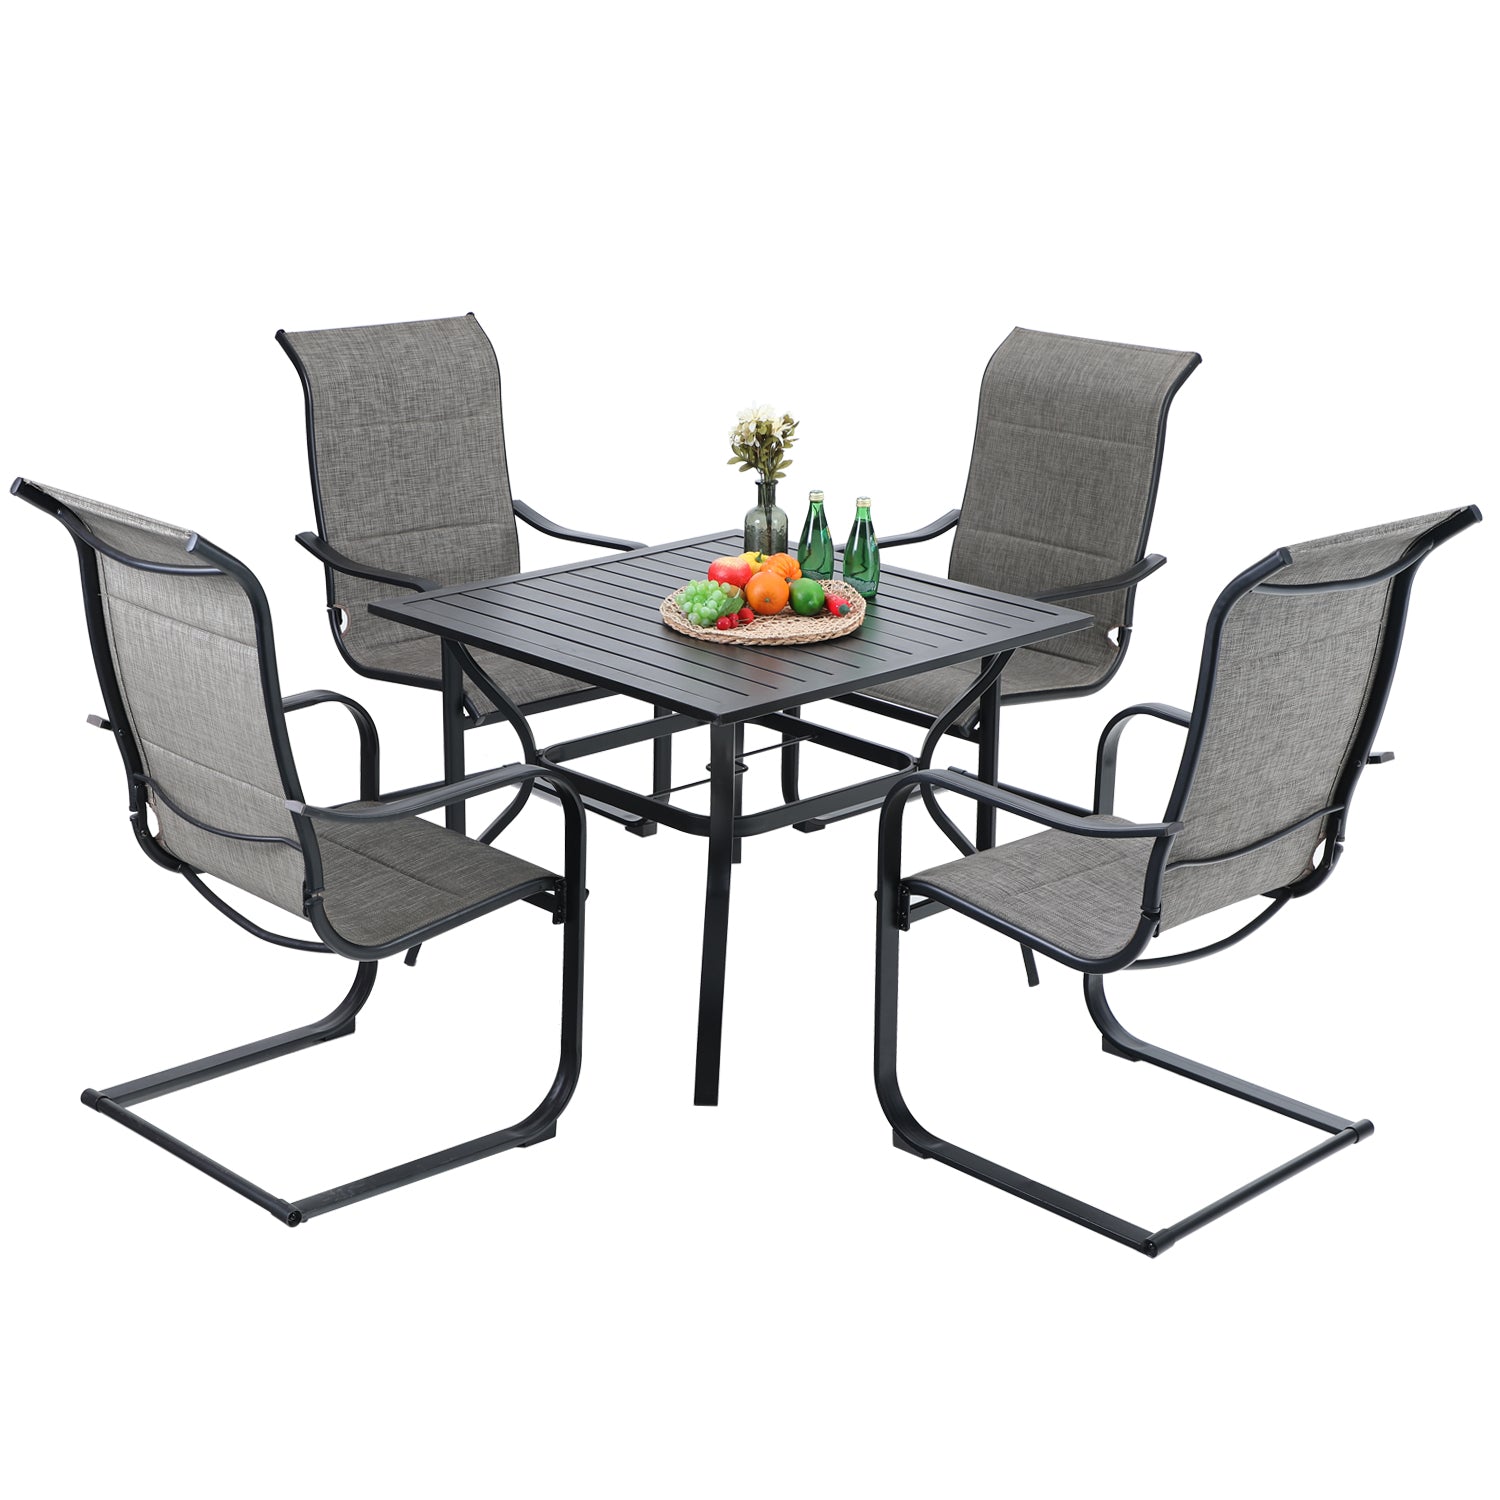 MFSTUDIO Steel Square Table & 4 Textilene C-Spring Chairs 5-Piece Outdoor Dining Set